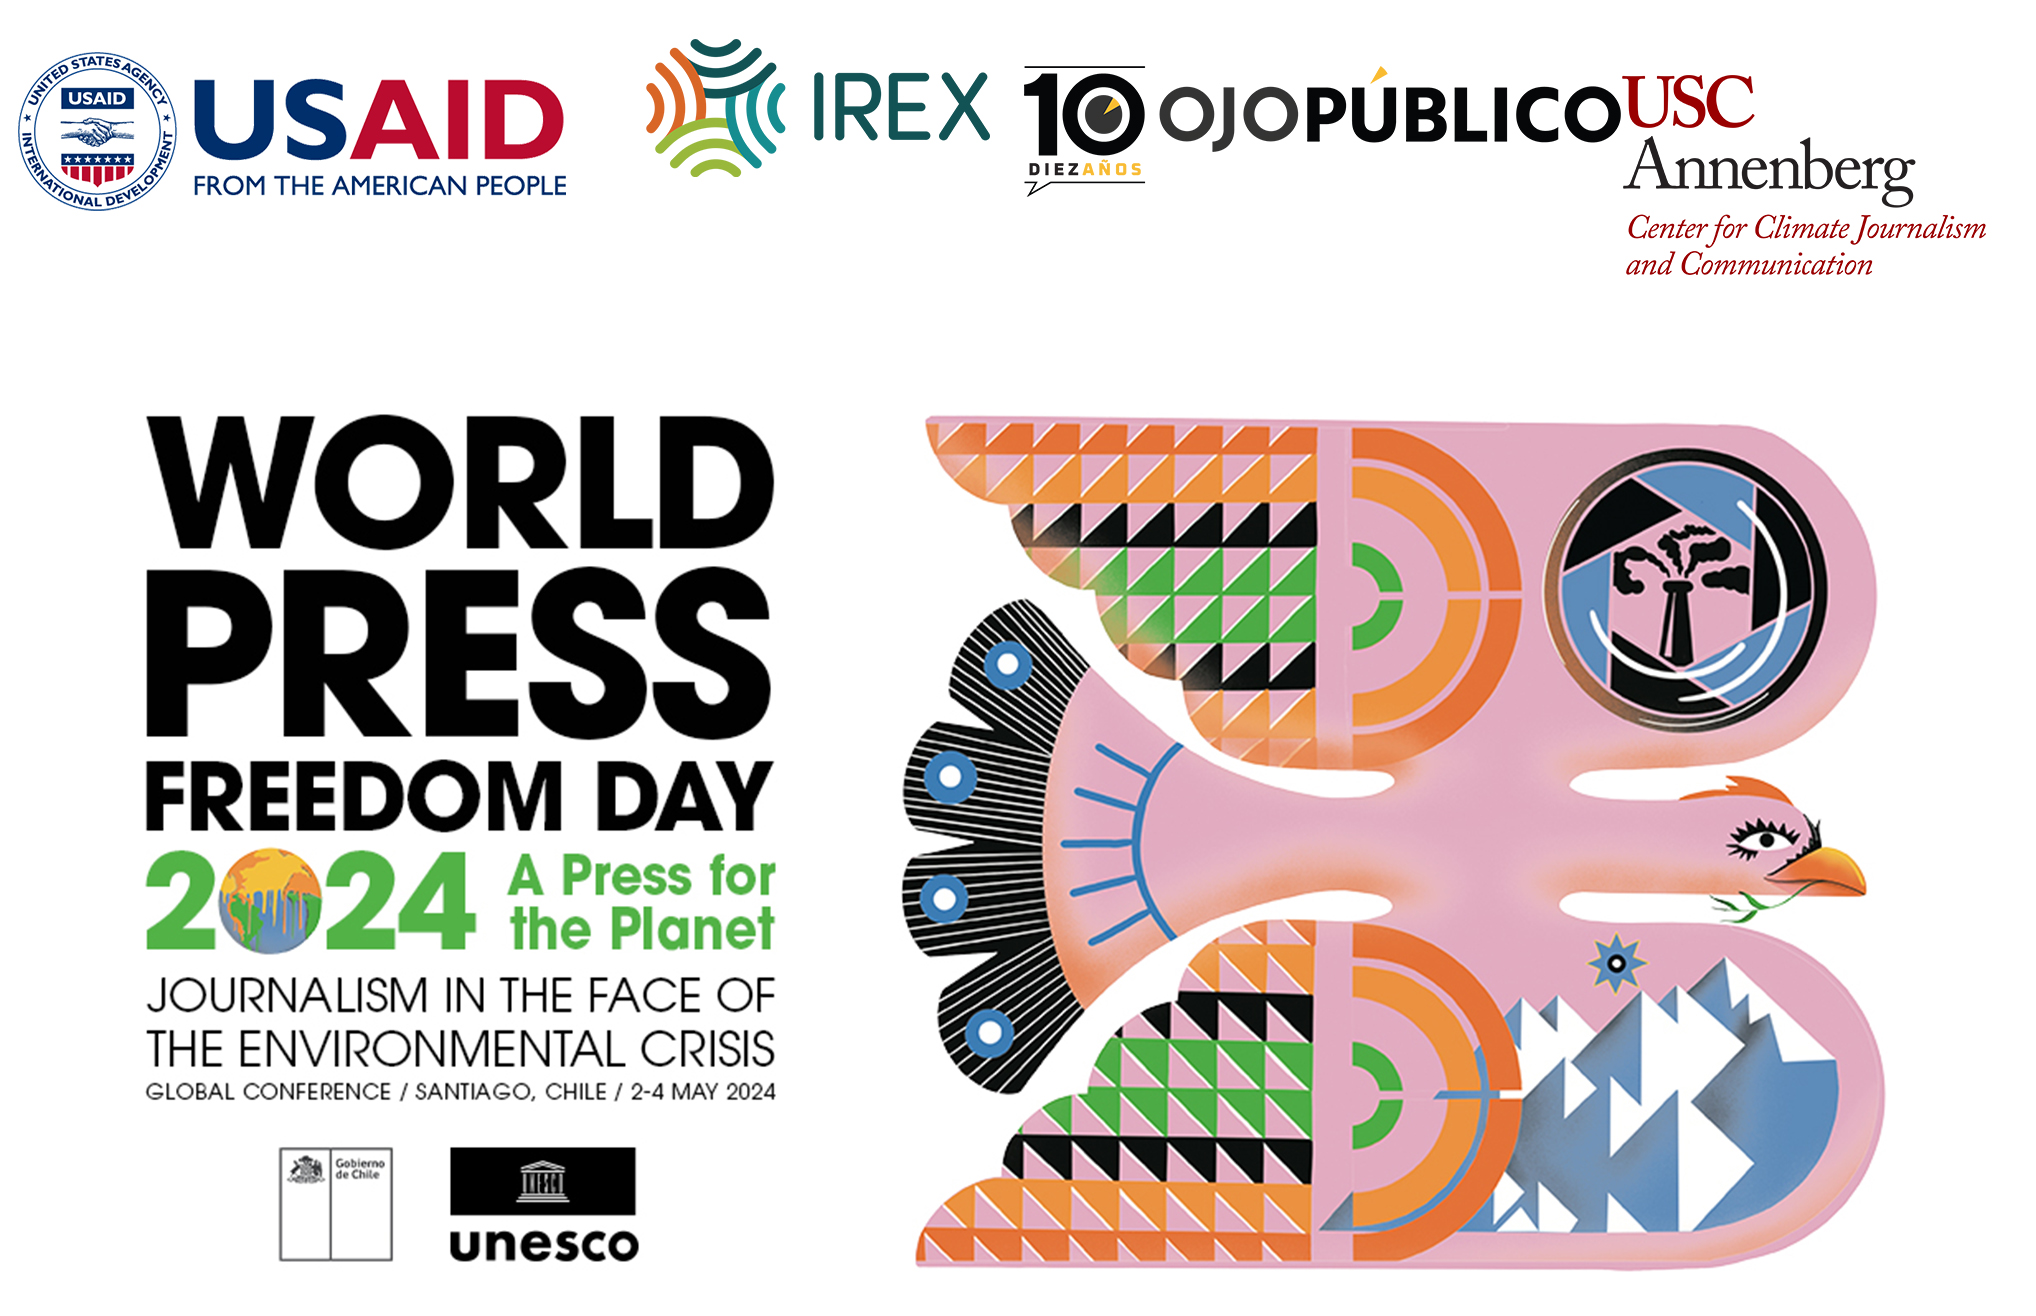 Logos for USAID, IREX,PUBLICO, USC Annenberg  and World Press Freedom Day 2024 